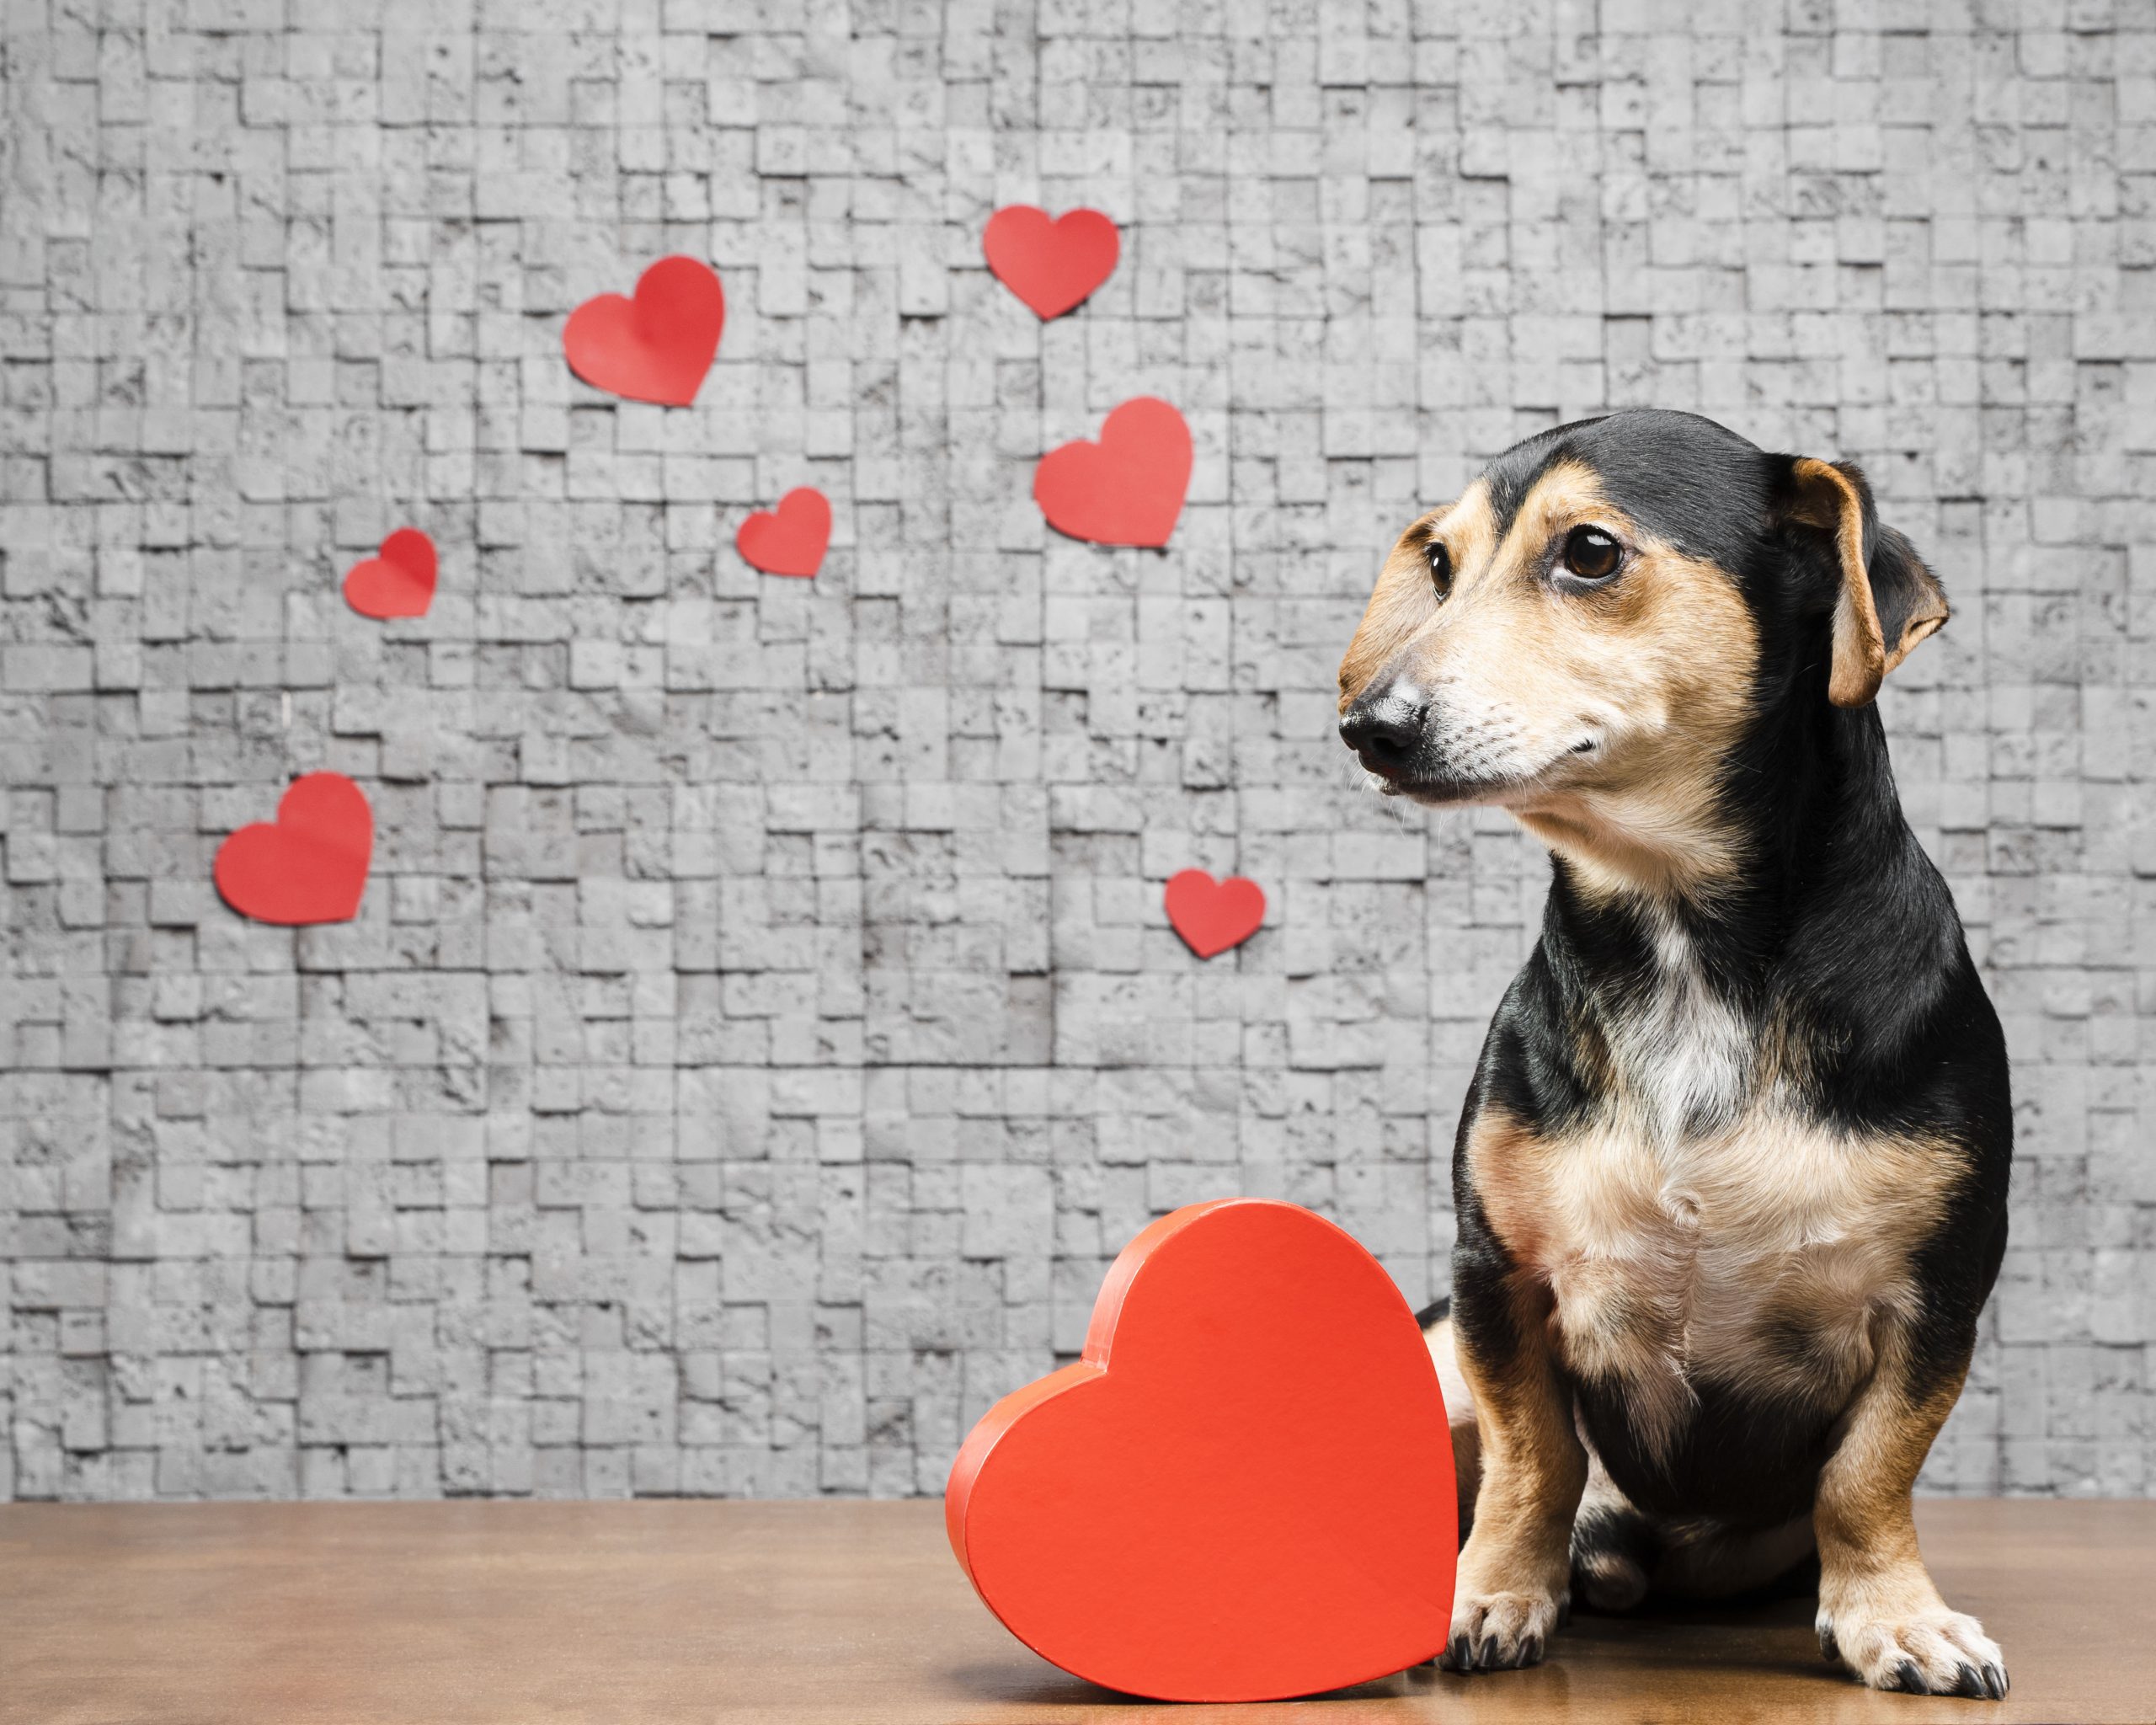 Dogs make the best Valentine's Day dates.